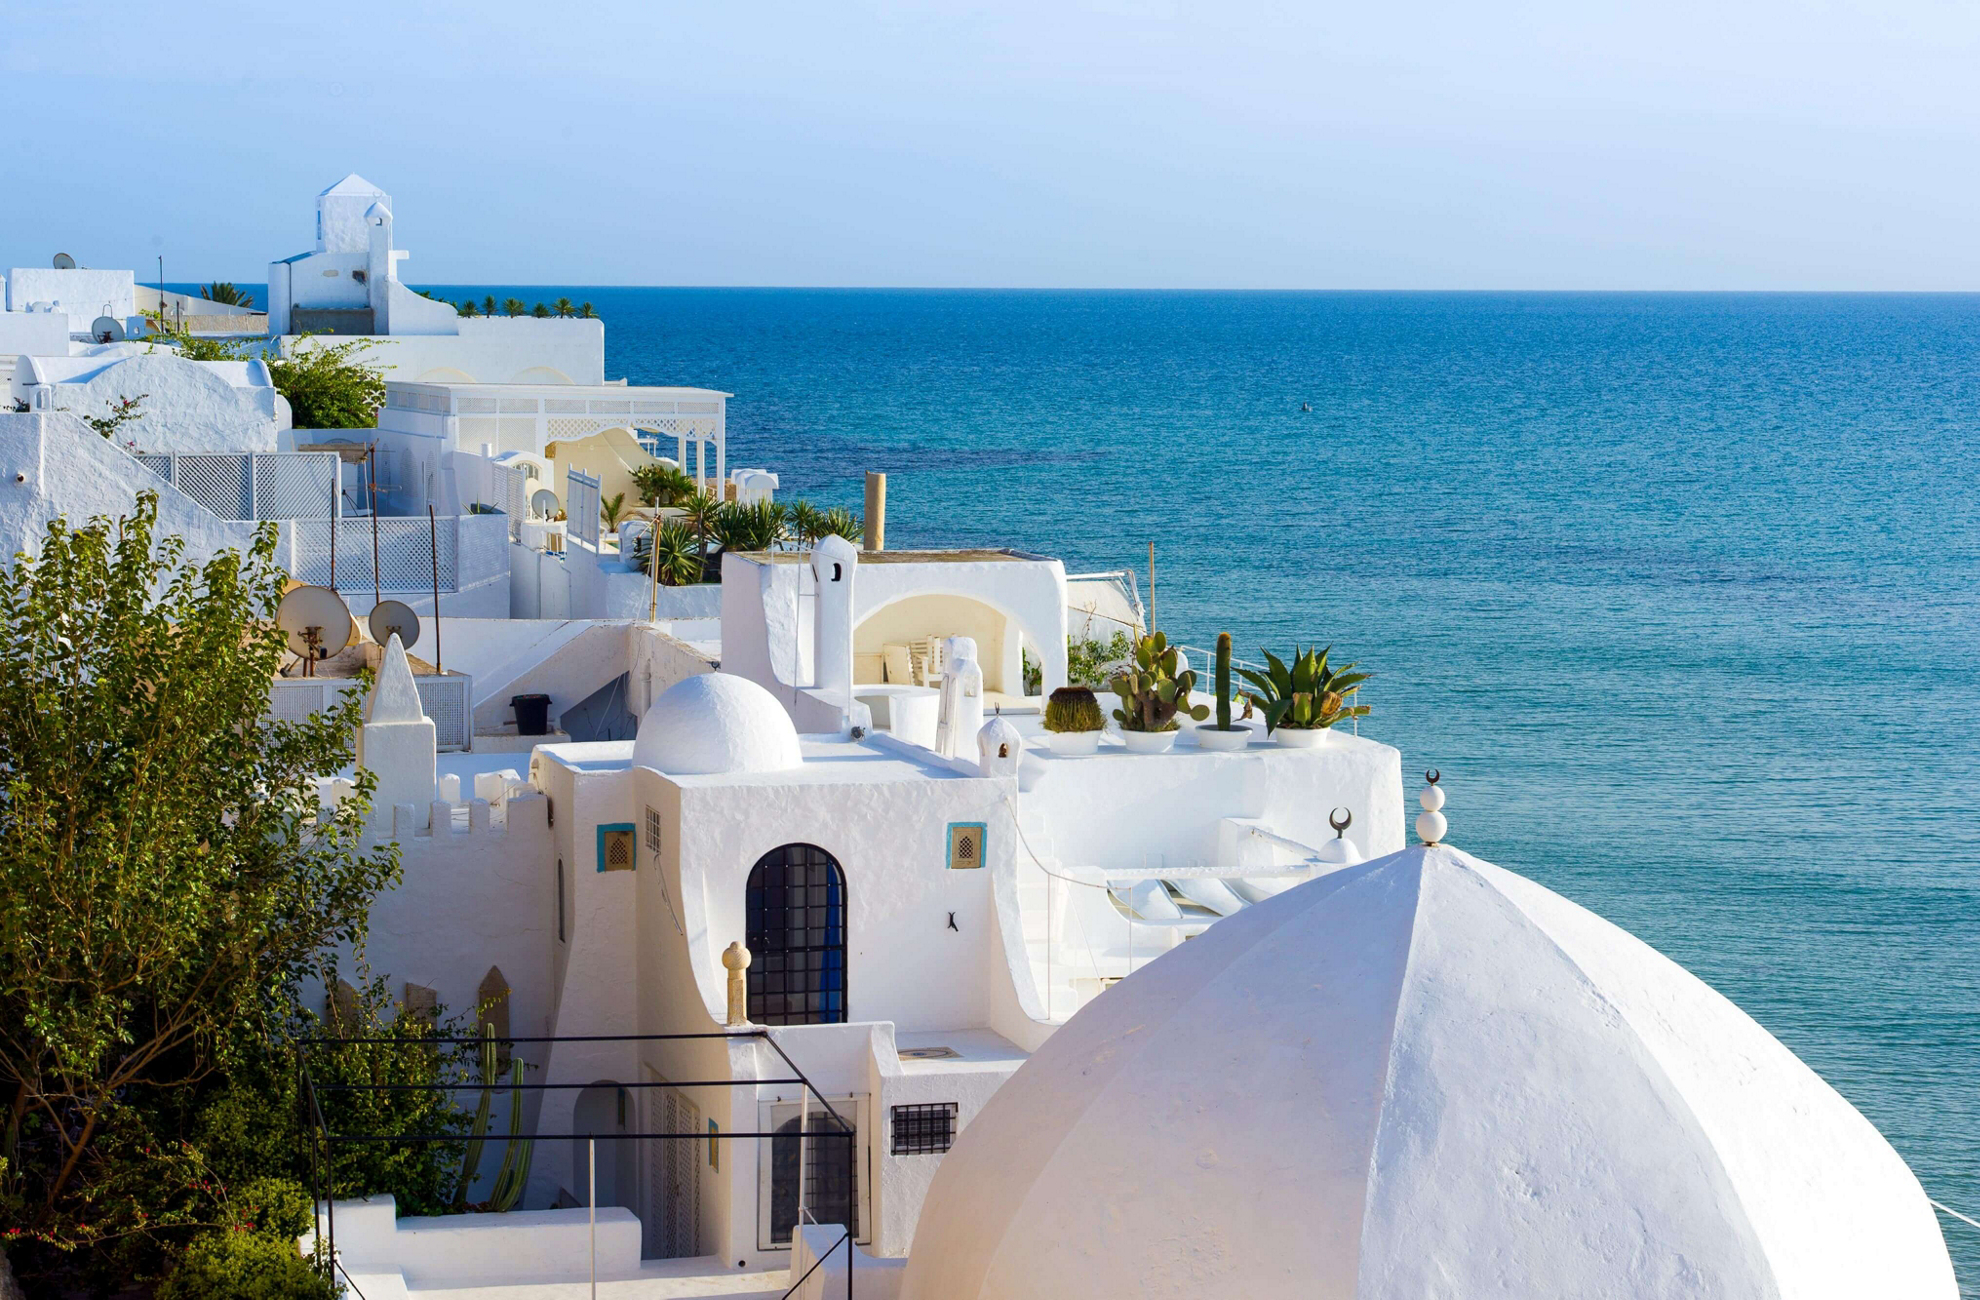 The whitewashed buildings and topaz sea of Tunisia